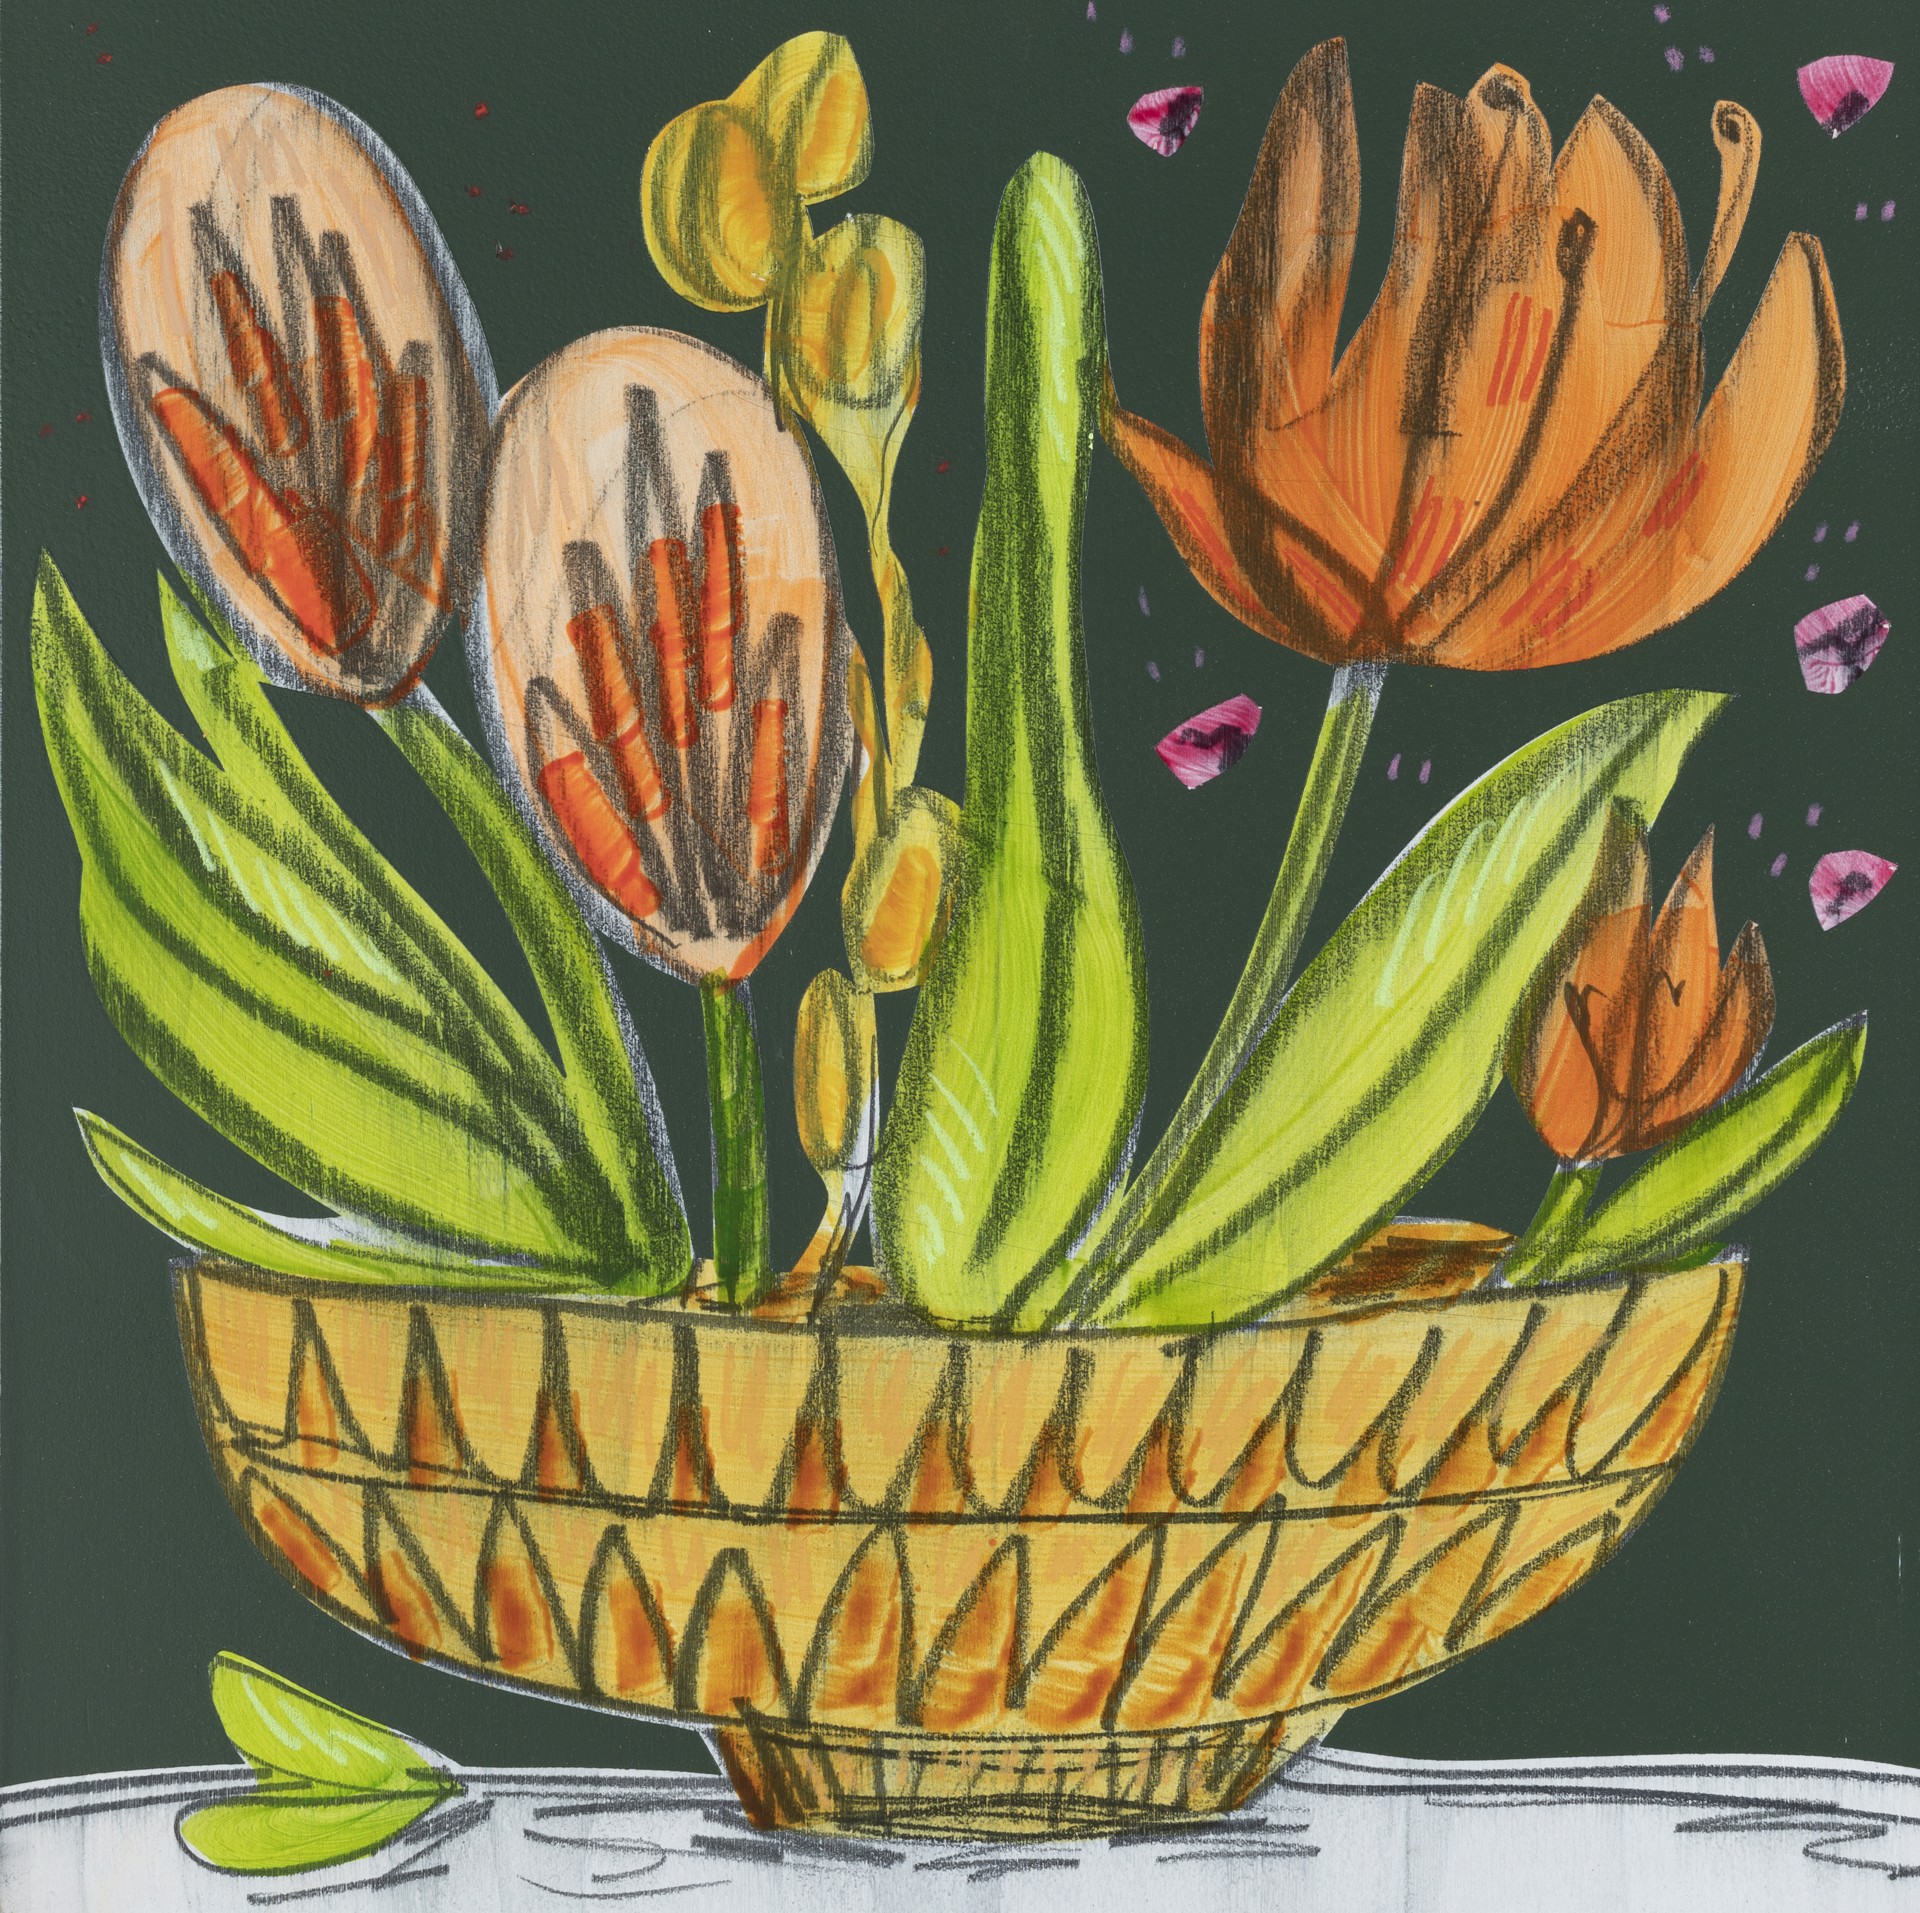 Ochre Bowl & Tiger Lilly  by Glory Day Loflin Paintings